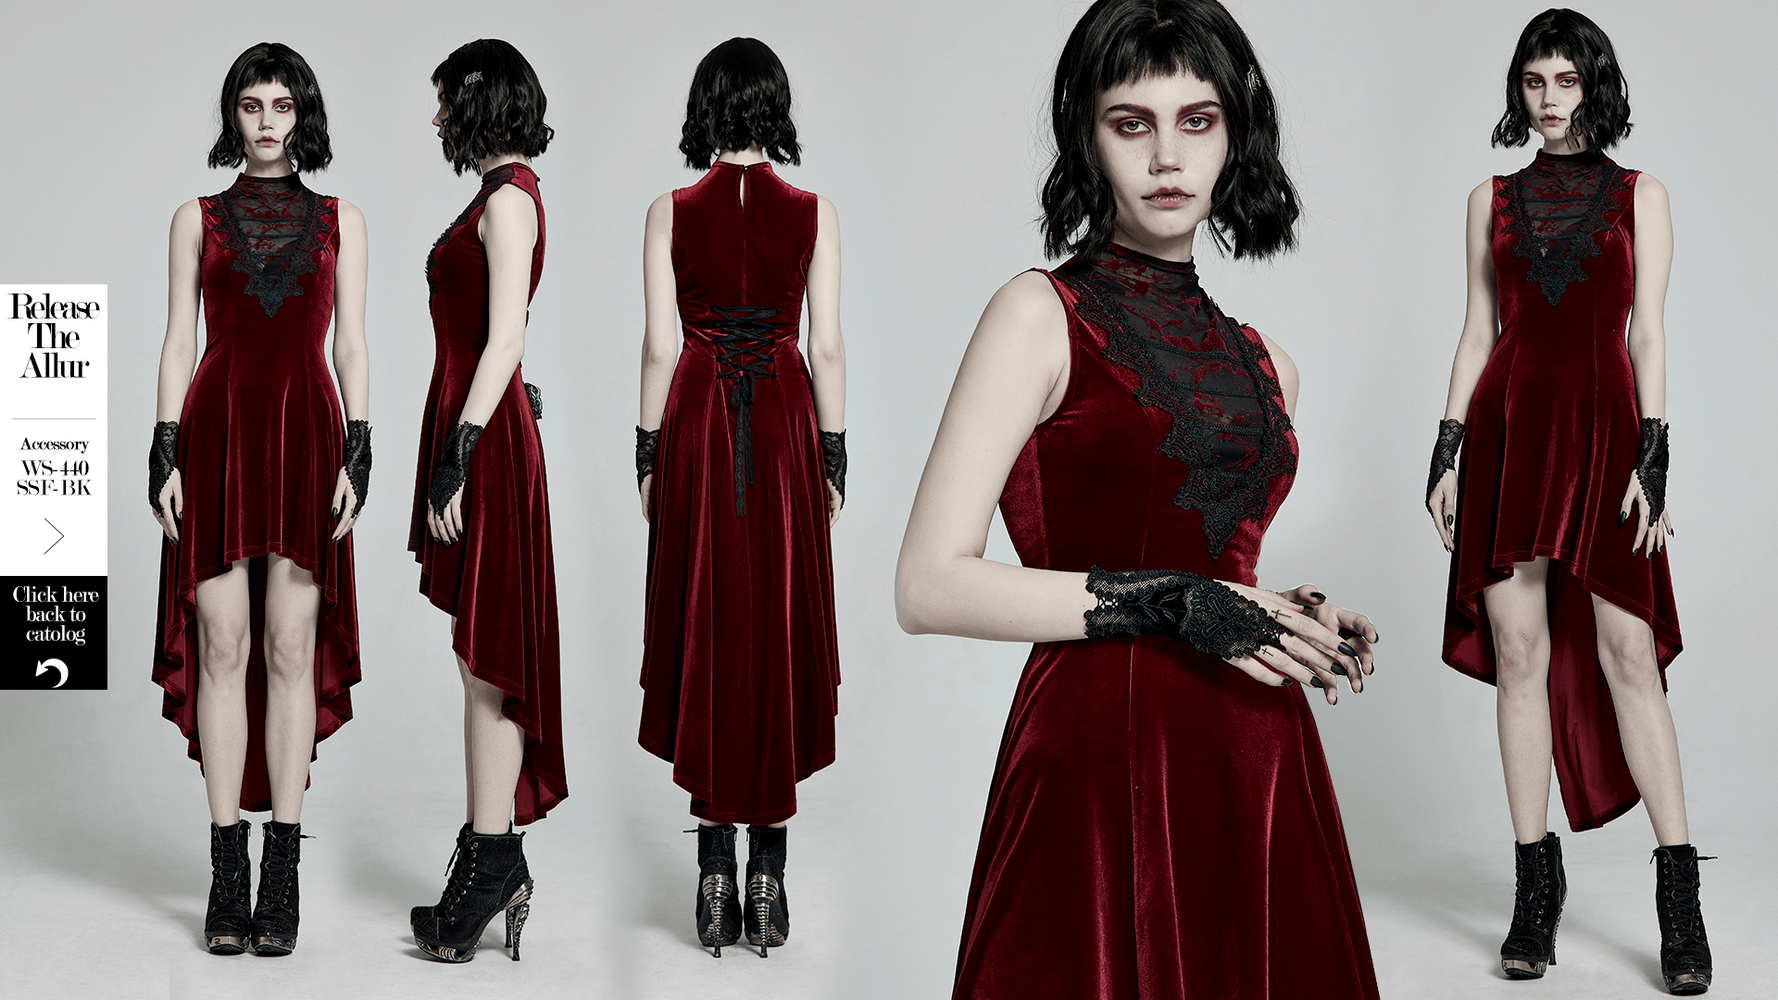 Vintage Style Red Velvet Dress With Lace Detail - HARD'N'HEAVY